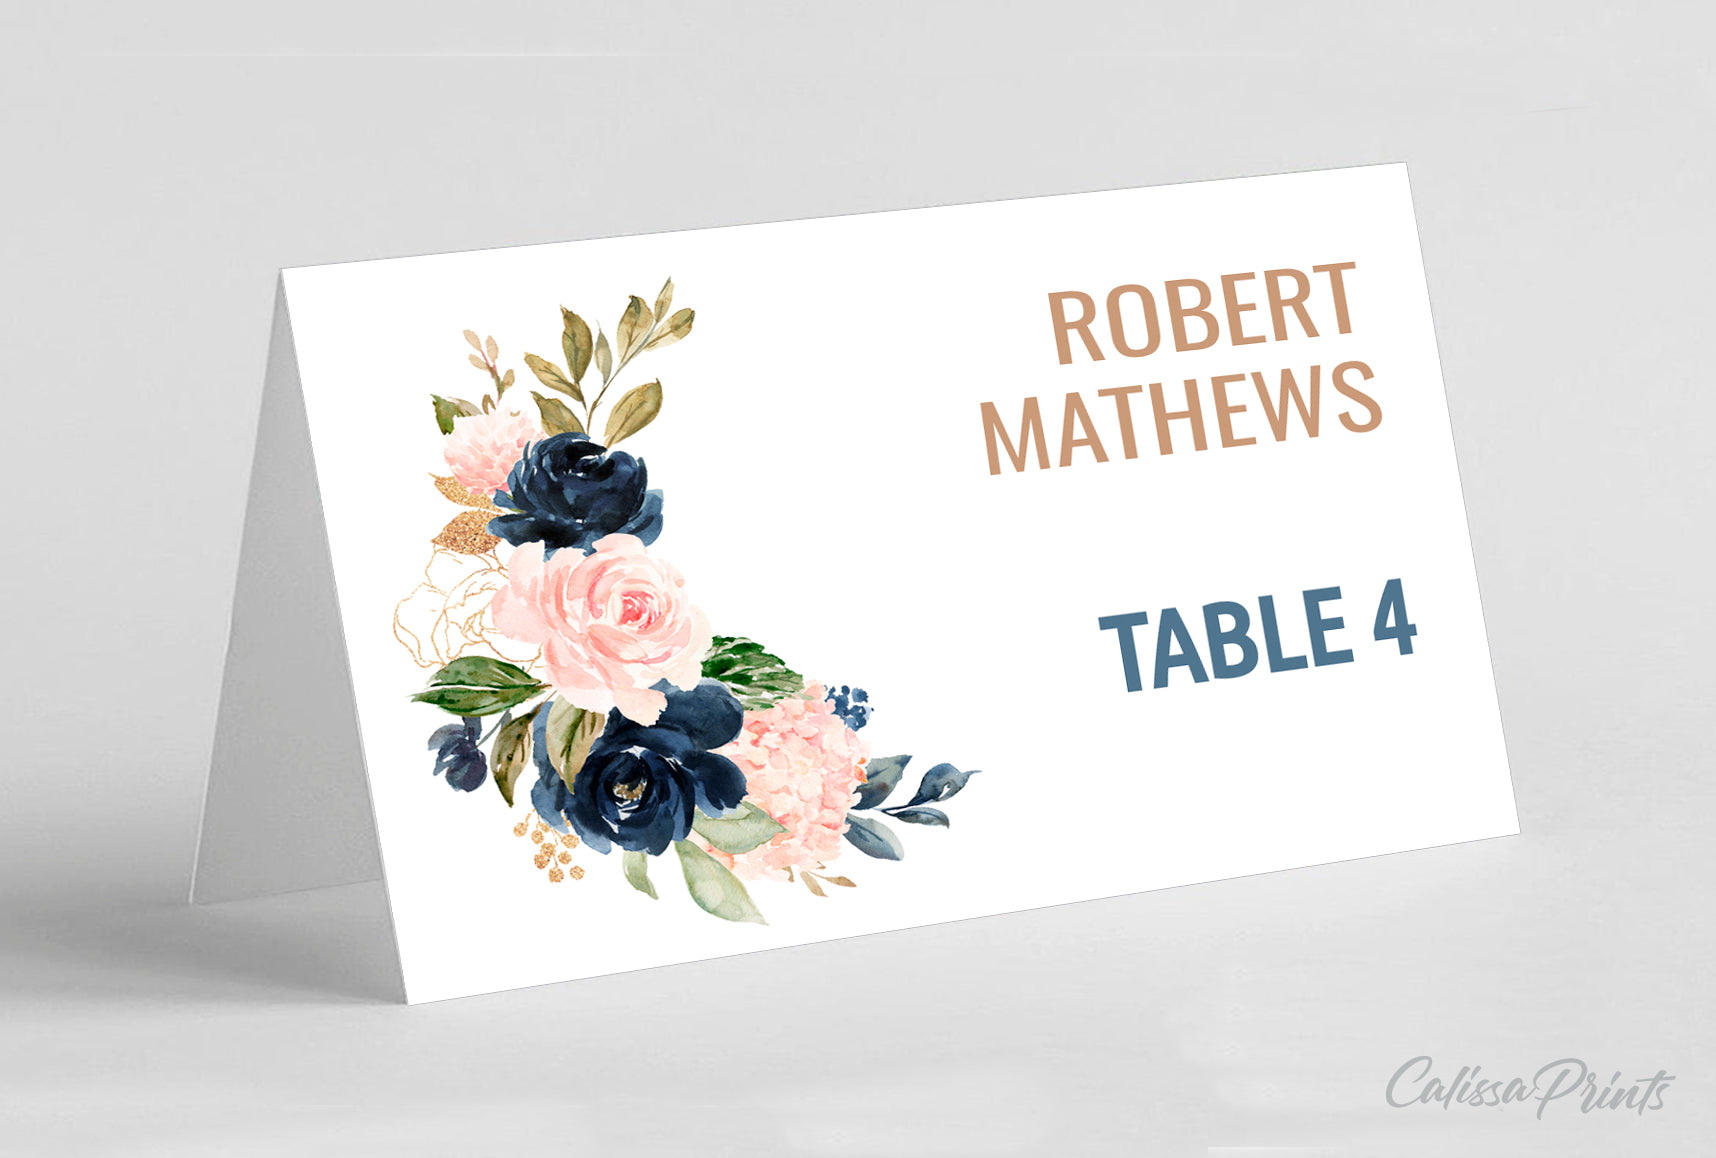 Baby Shower Place / Seating Card Template, Navy Blush Design - BABY25